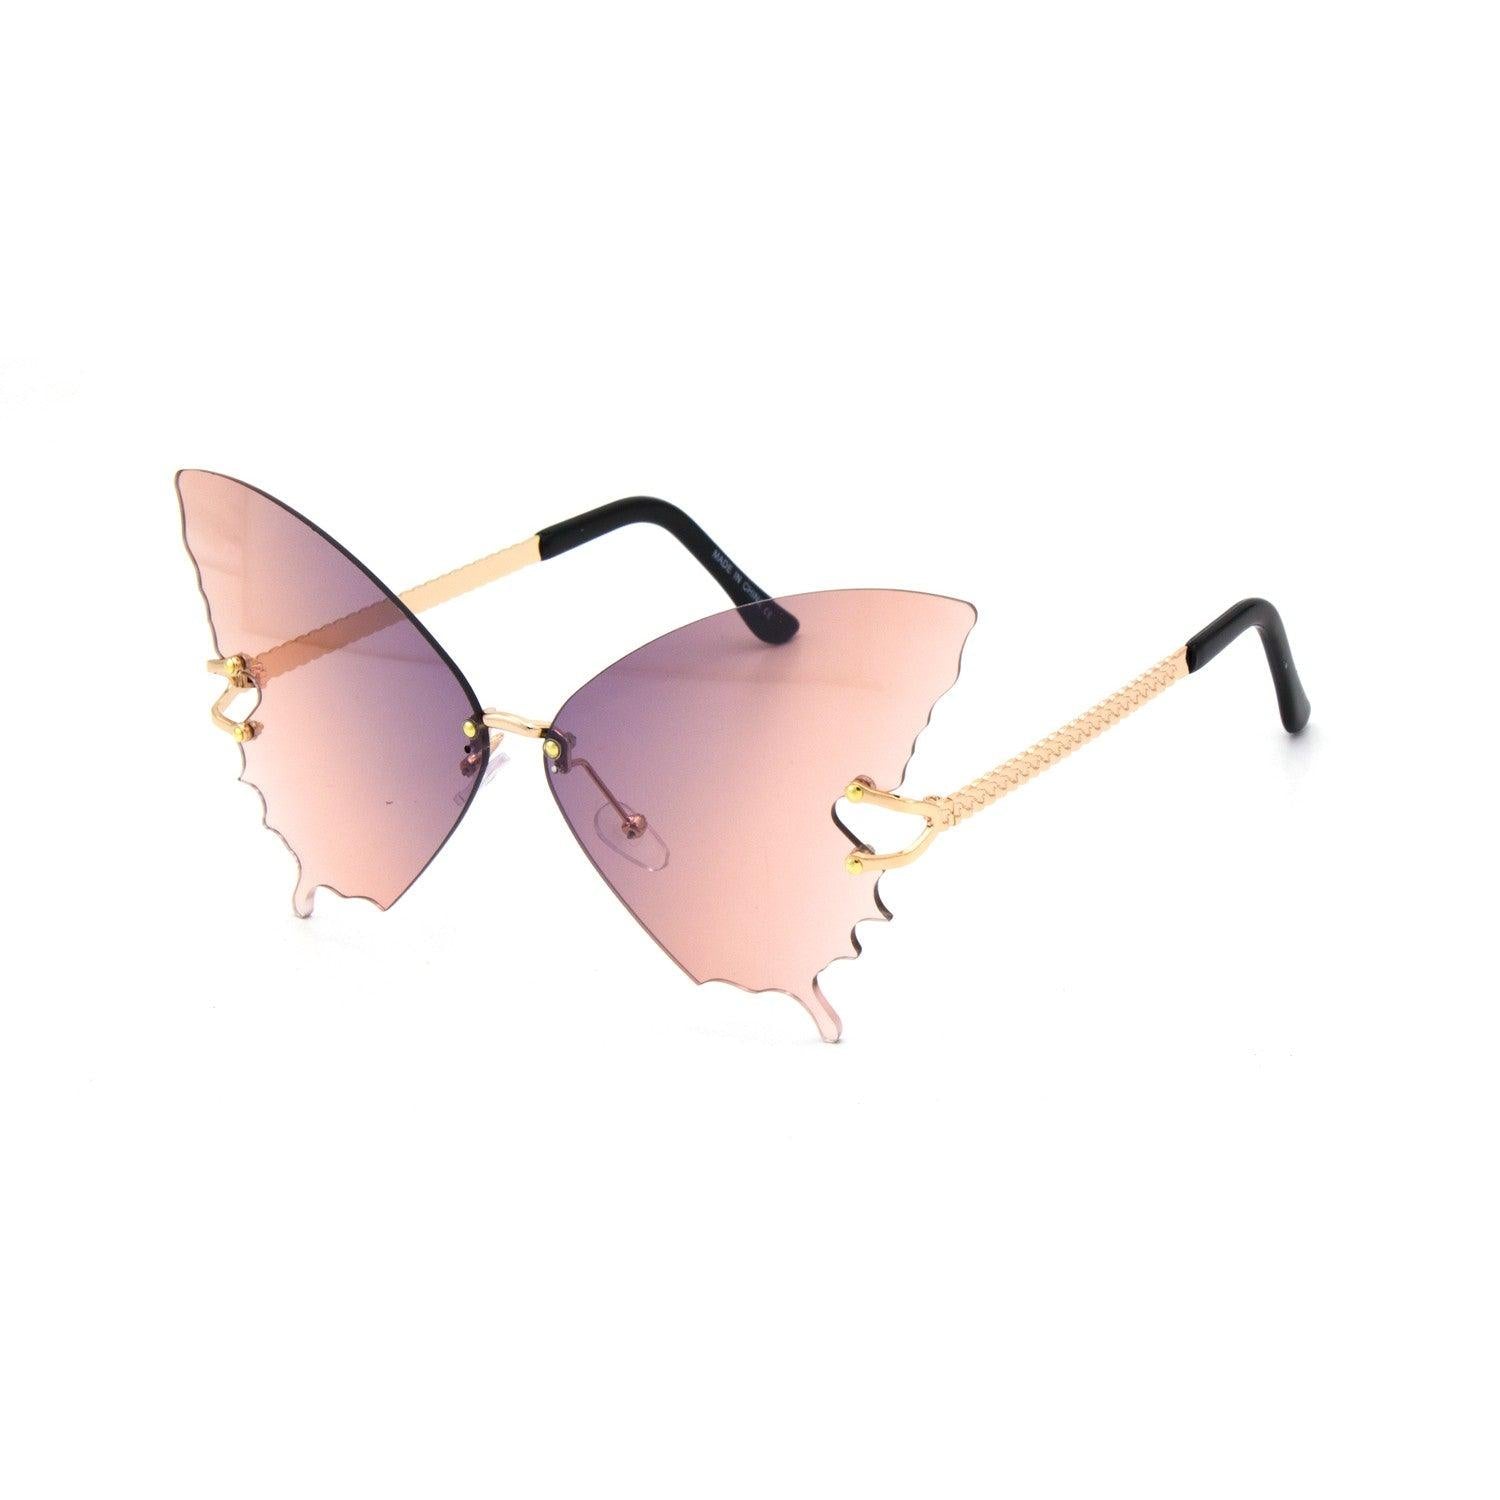 Butterfly Oversize Sunglasses - Mint Leafe Boutique 